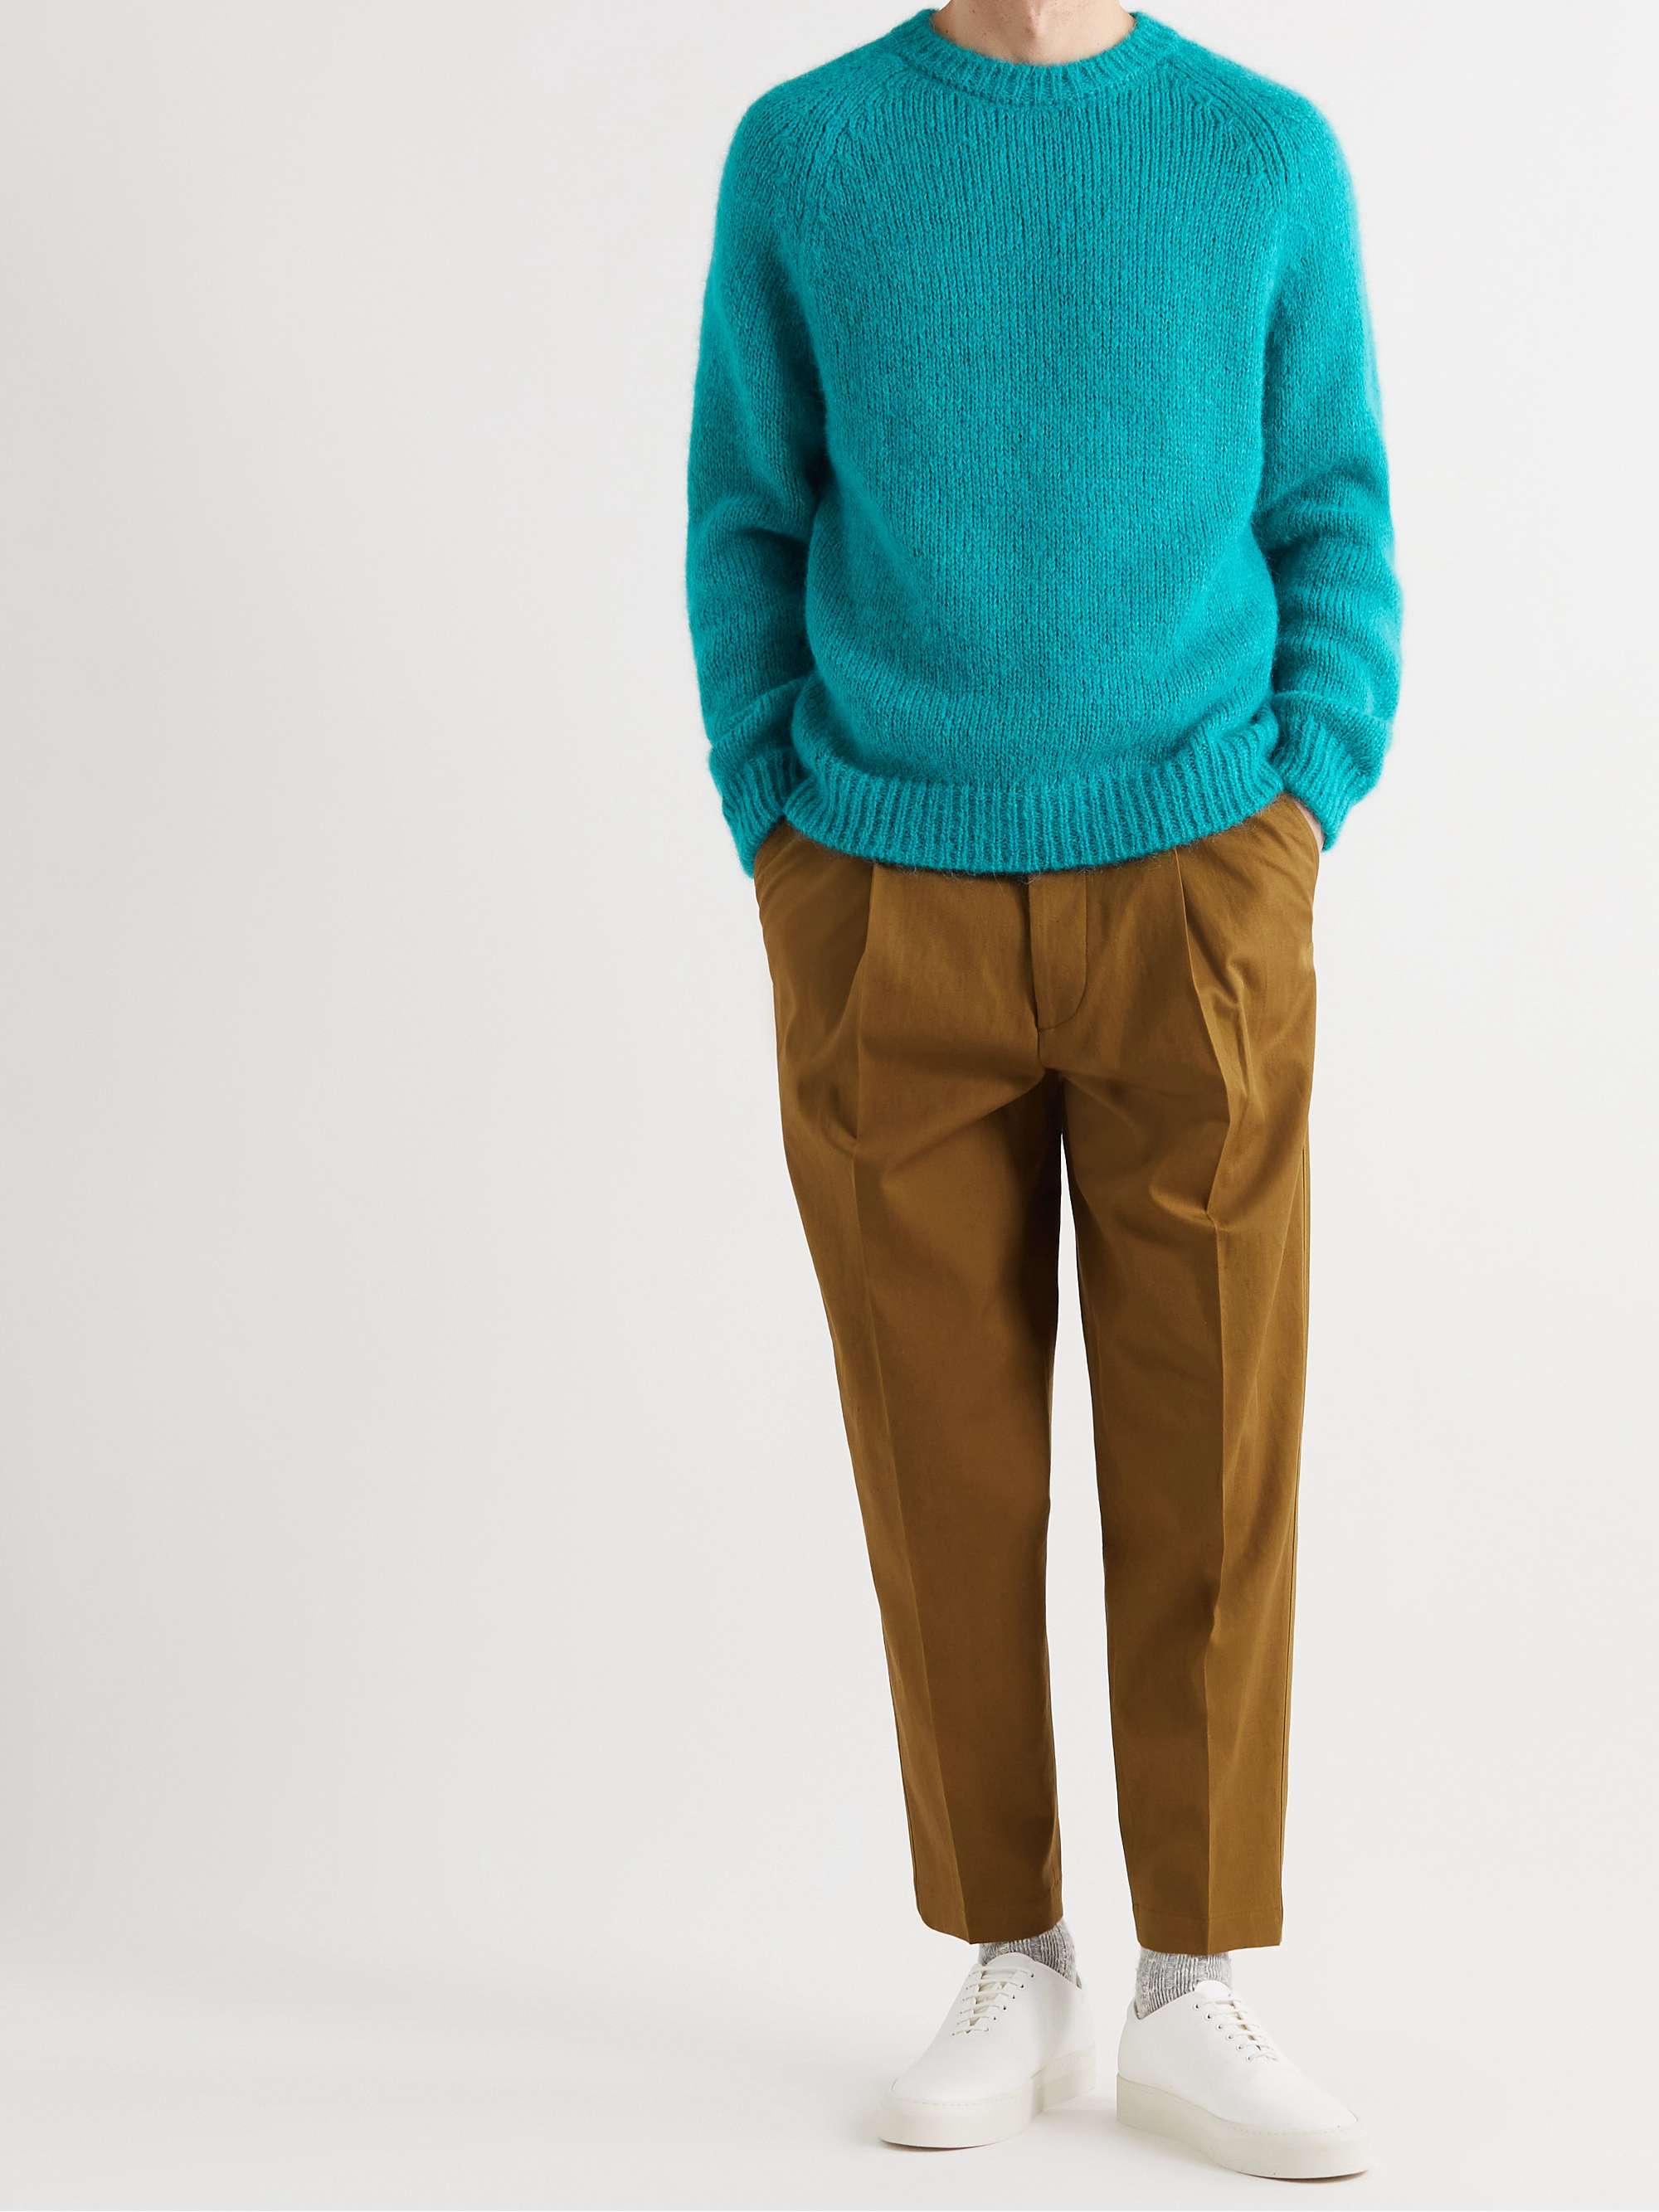 TOD'S Tapered Pleated Cotton and Linen-Blend Twill Trousers